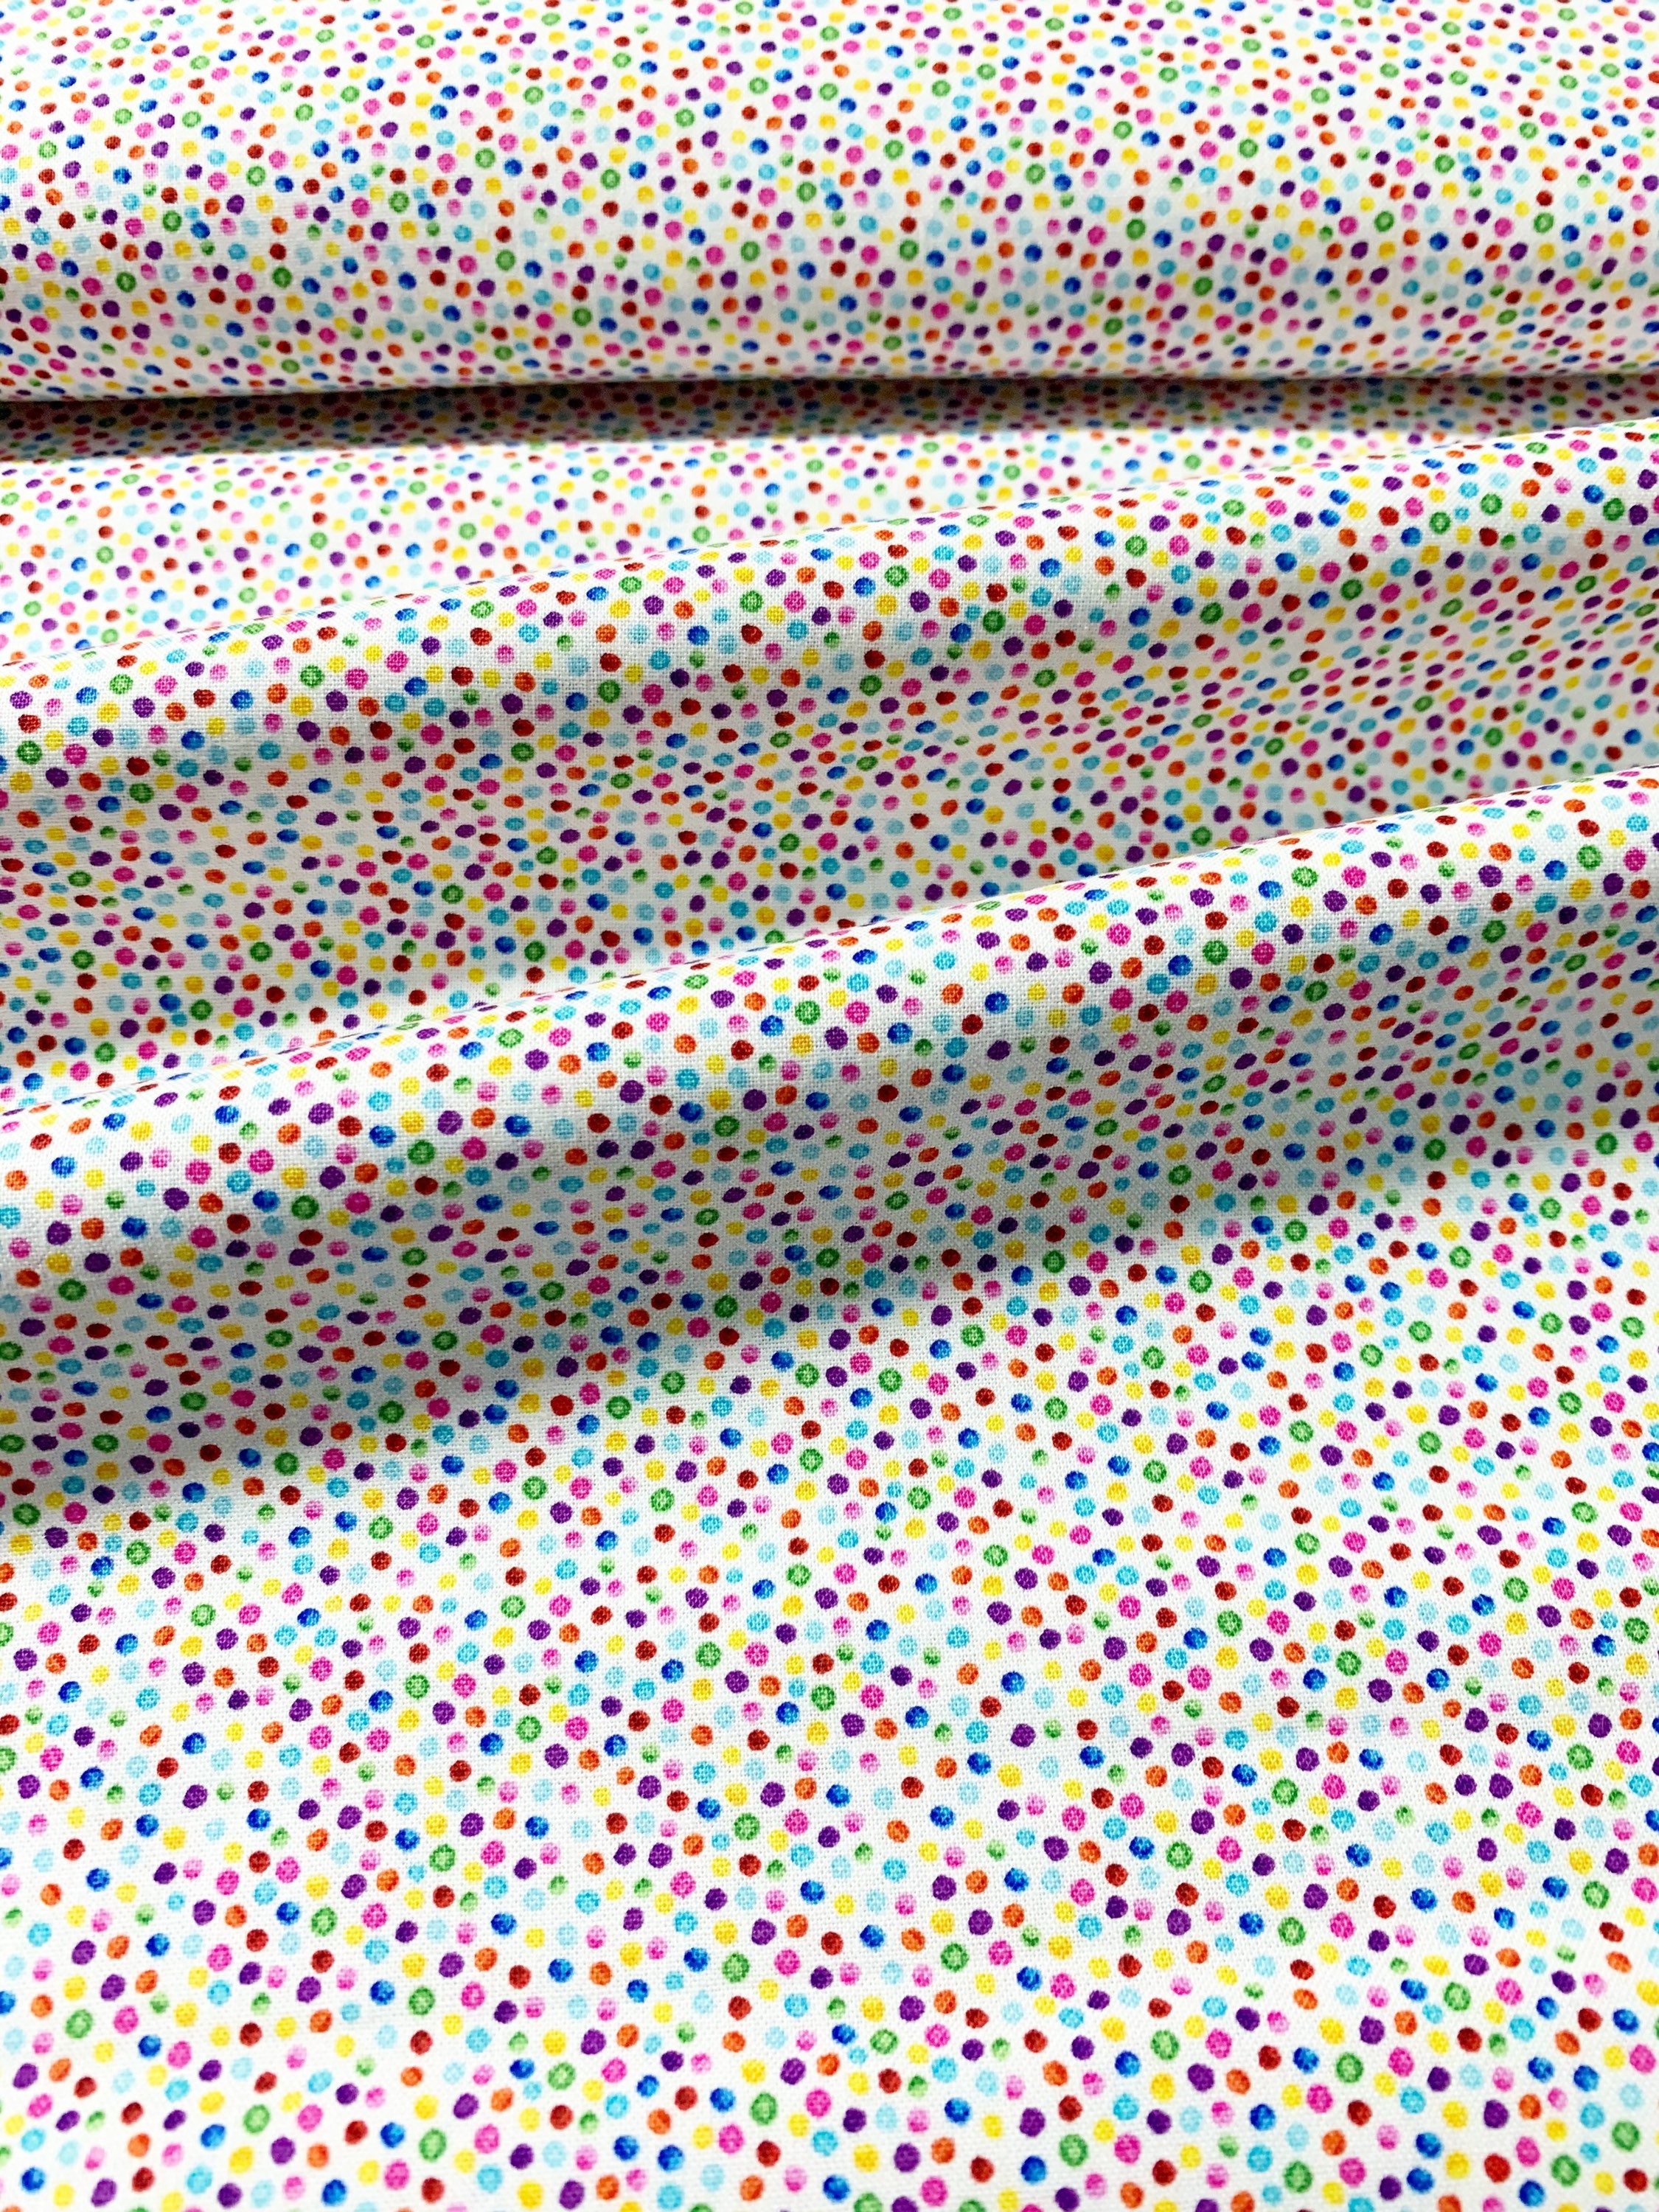 Pin Dot Multi Colored Fabric.....1/2 yard of a 44 Wide 100% | Etsy